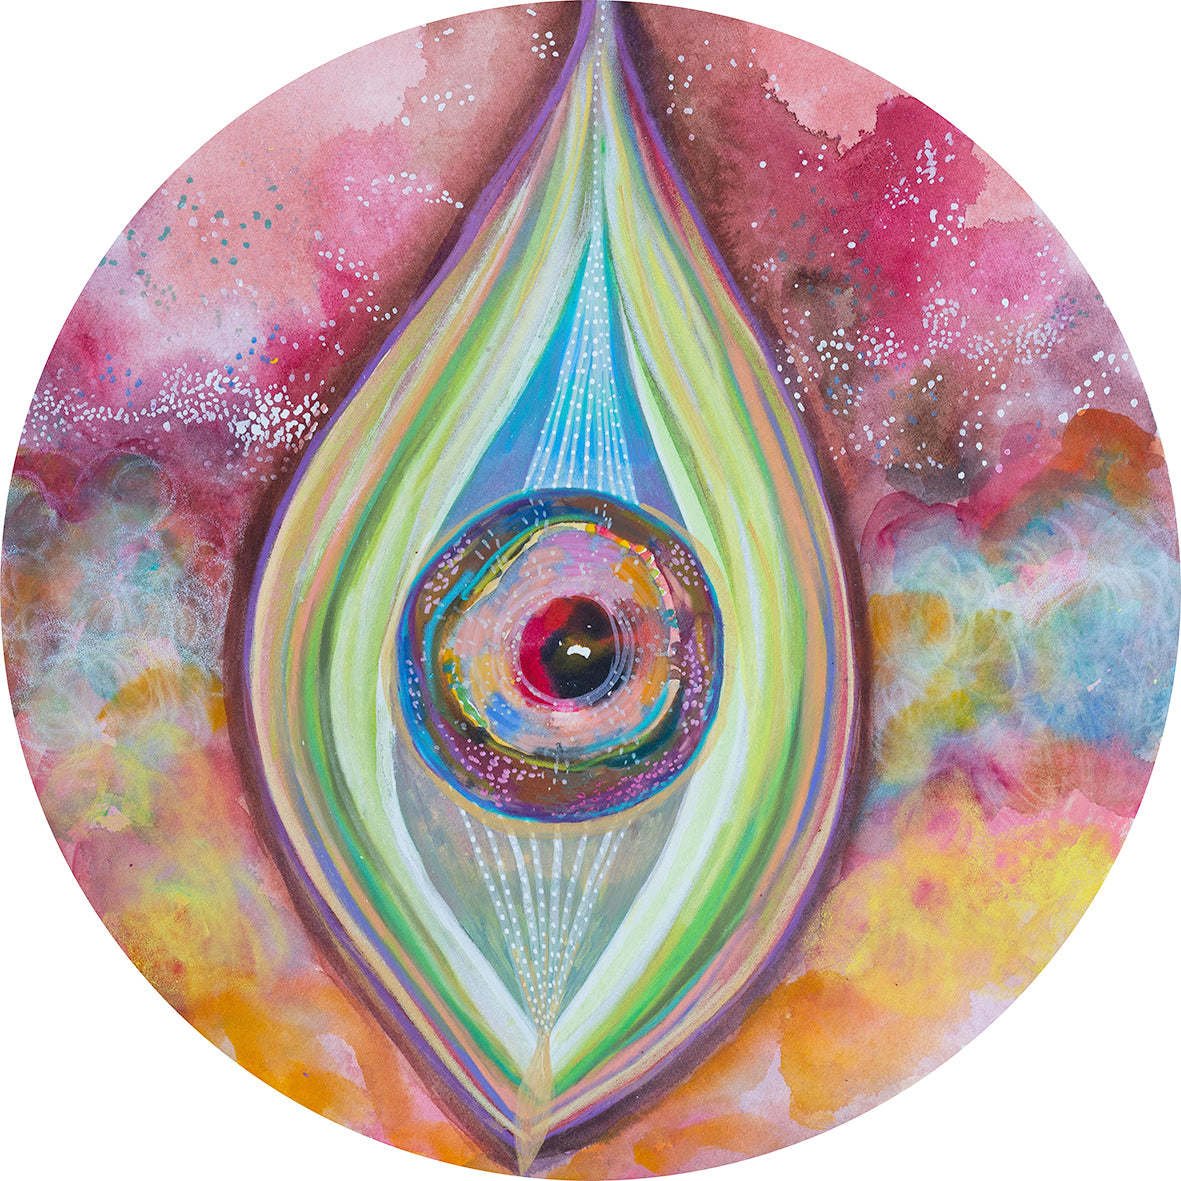 Mixed media on paper, "Seed of Mother Gaia"